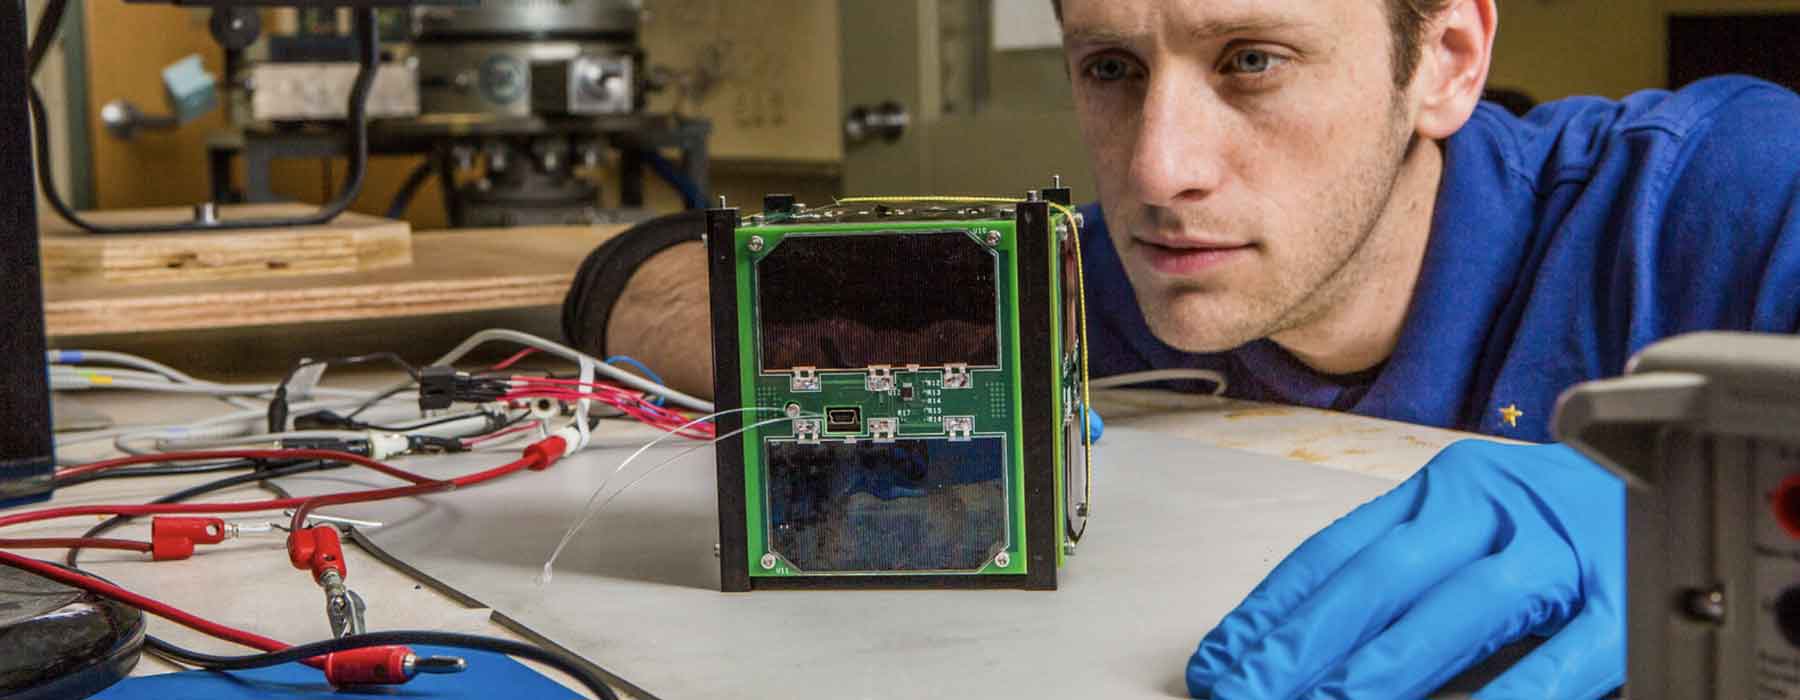 Mechanical engineering major Patrick Wade gives the "cubesat" he helped design and build a final inspection as part of his work with the Alaska Space Grant program. The miniature satellite is scheduled to be launched into space in August, 2015 from Vandenburg Air Force Base in California.